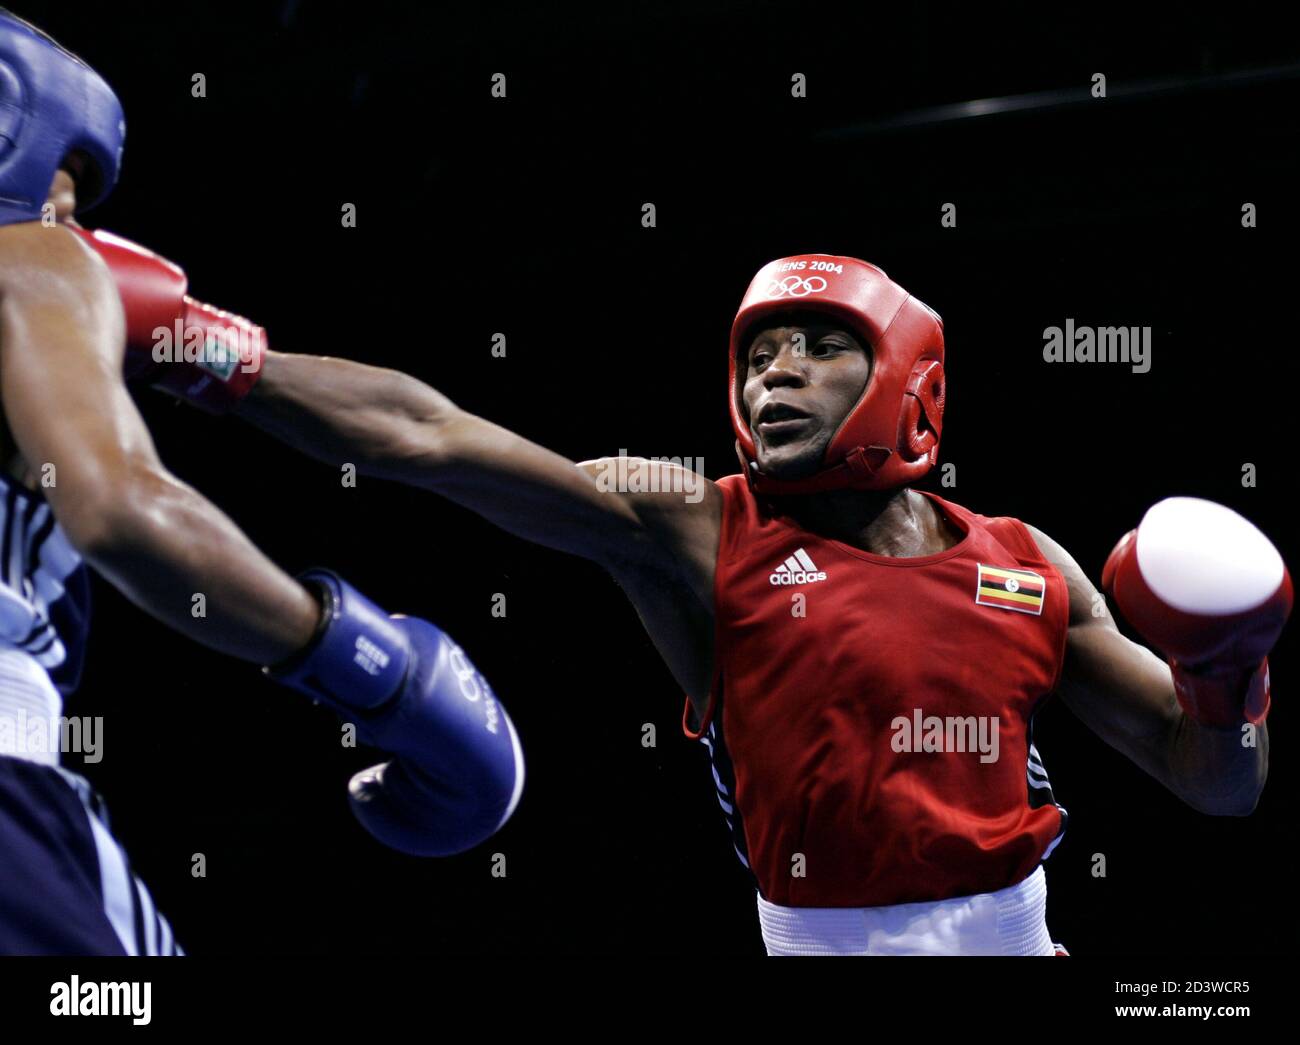 Uganda's Sam Rukundo (R) punches Puerto Rico's Alexander de Jesus (L) in their lightweight (60kg) round of 16 boxing bout at the Athens 2004 Olympic Summer Games, August 20, 2004. Rukundo won the bout. Stock Photo